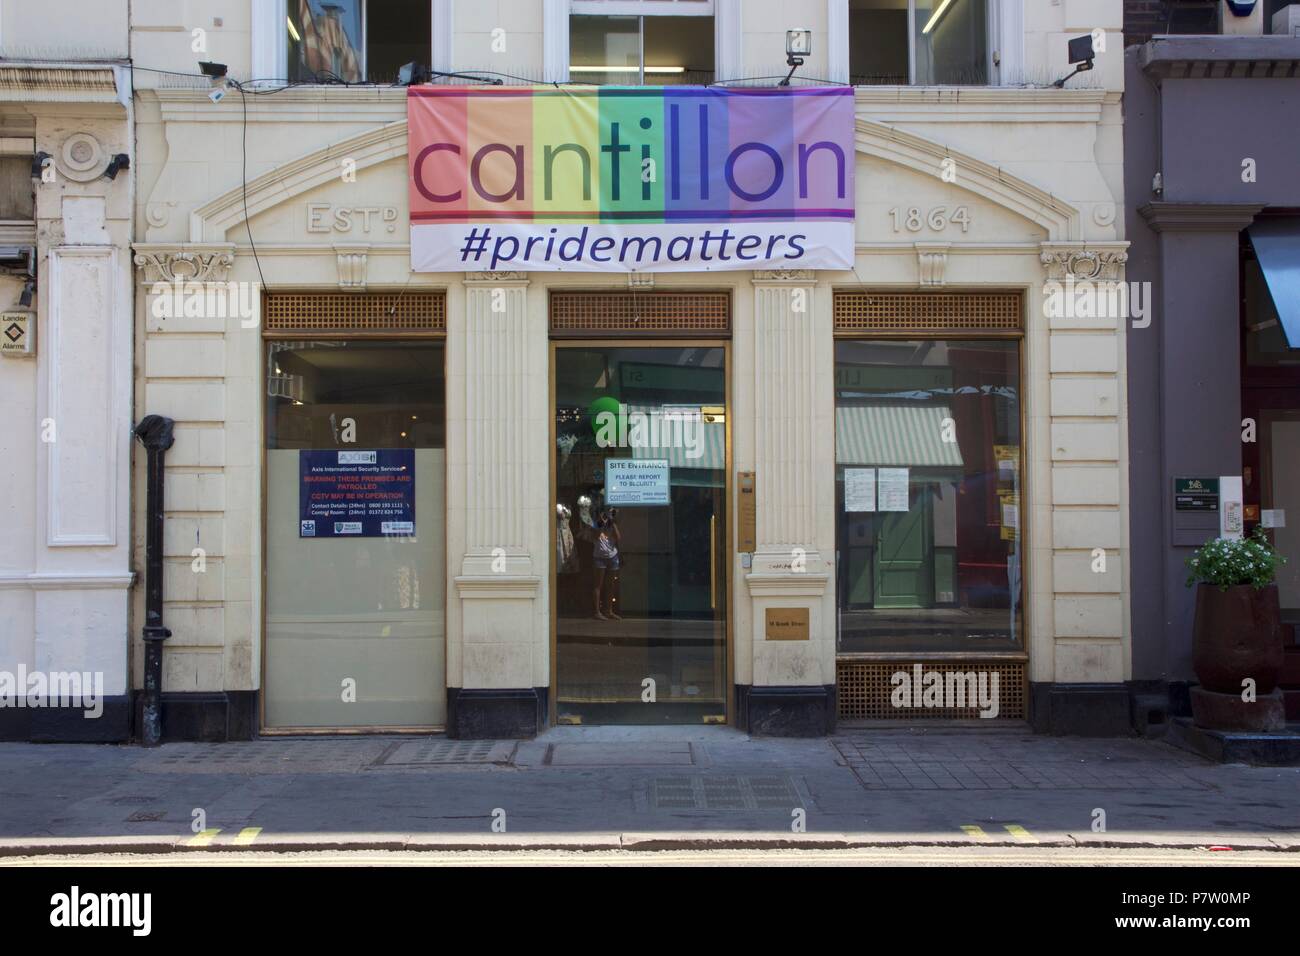 London, UK. 7th July 2018. Pride celebrations in London. A rainbow flag for Cantillon #PrideMatters for Pride in London 2018. Credit: Dimple Patel/Alamy Live News Stock Photo